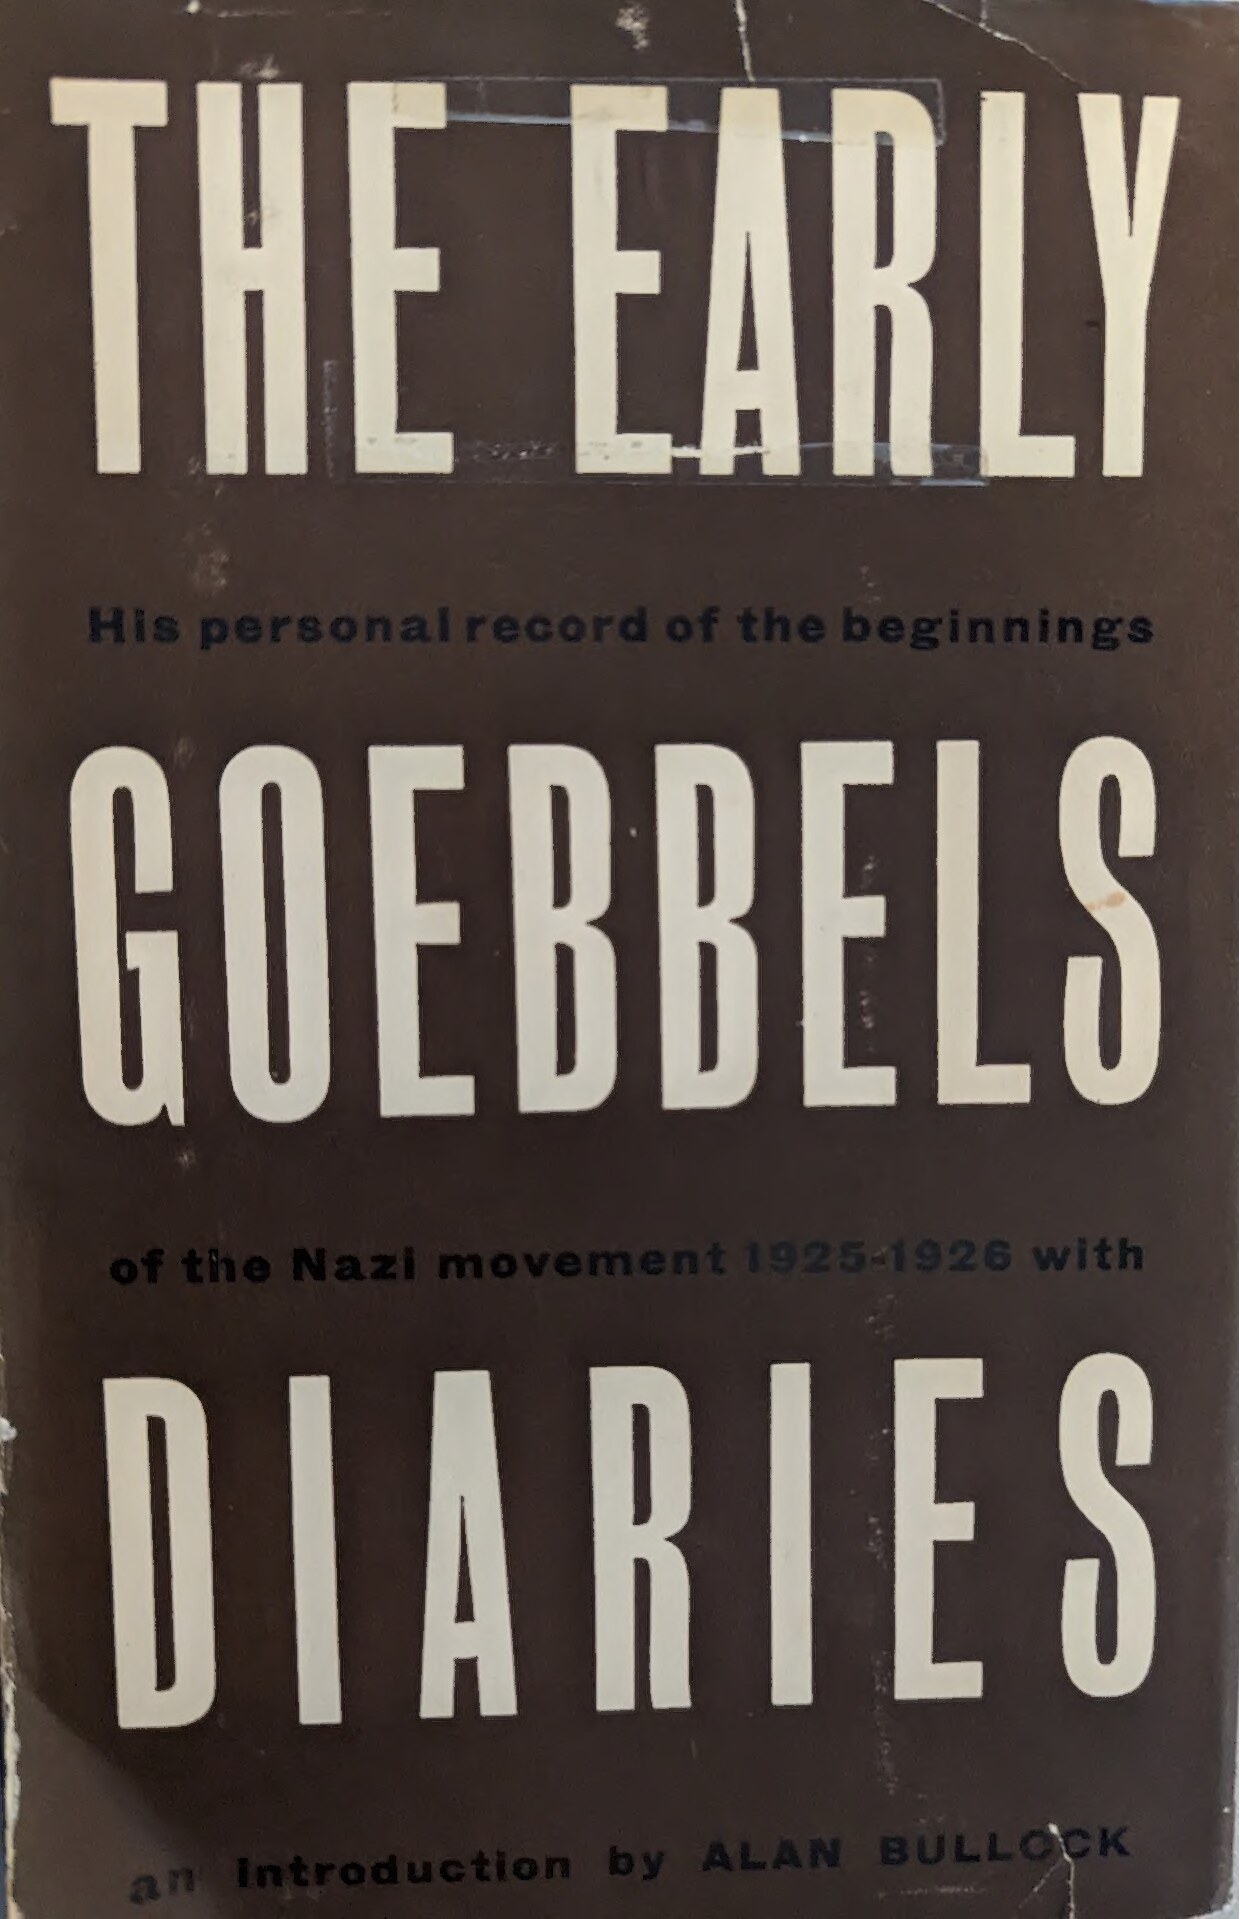 The Early Goebbels Diaries, 1925-1926